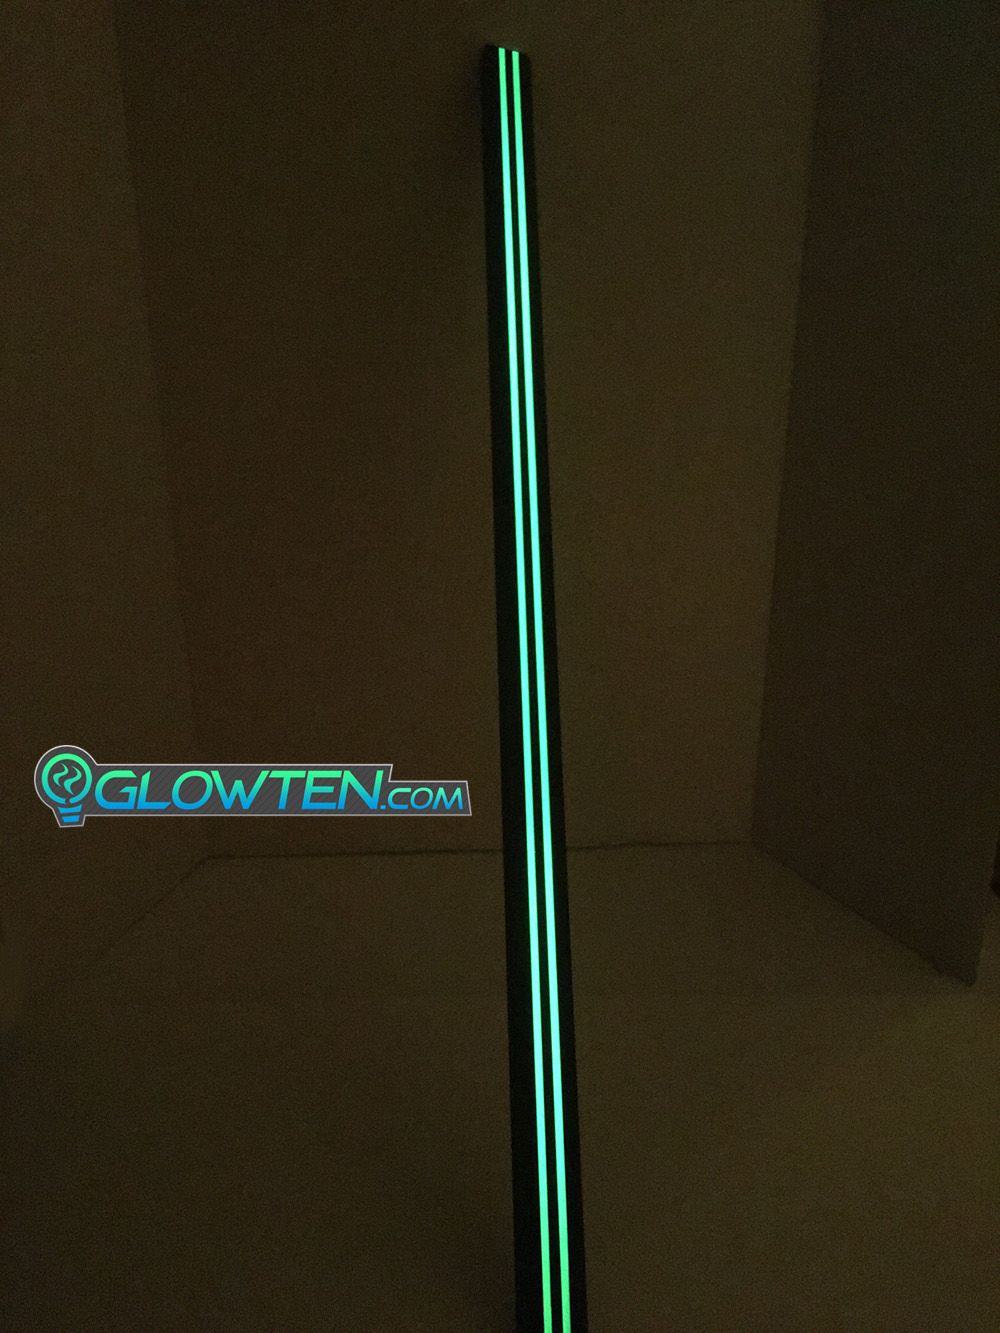 GLOWTEN.com - BLACK METAL ANTI-SLIP STAIRS TREAD 2-BANDS NOSING GLOW IN THE DARK LUMINOUS SAFETY STRIP NON-SKID SEE BETTER AT NIGHT PREVENT FALLING GRIP STRENGTH FOR MINIMUM 31.5